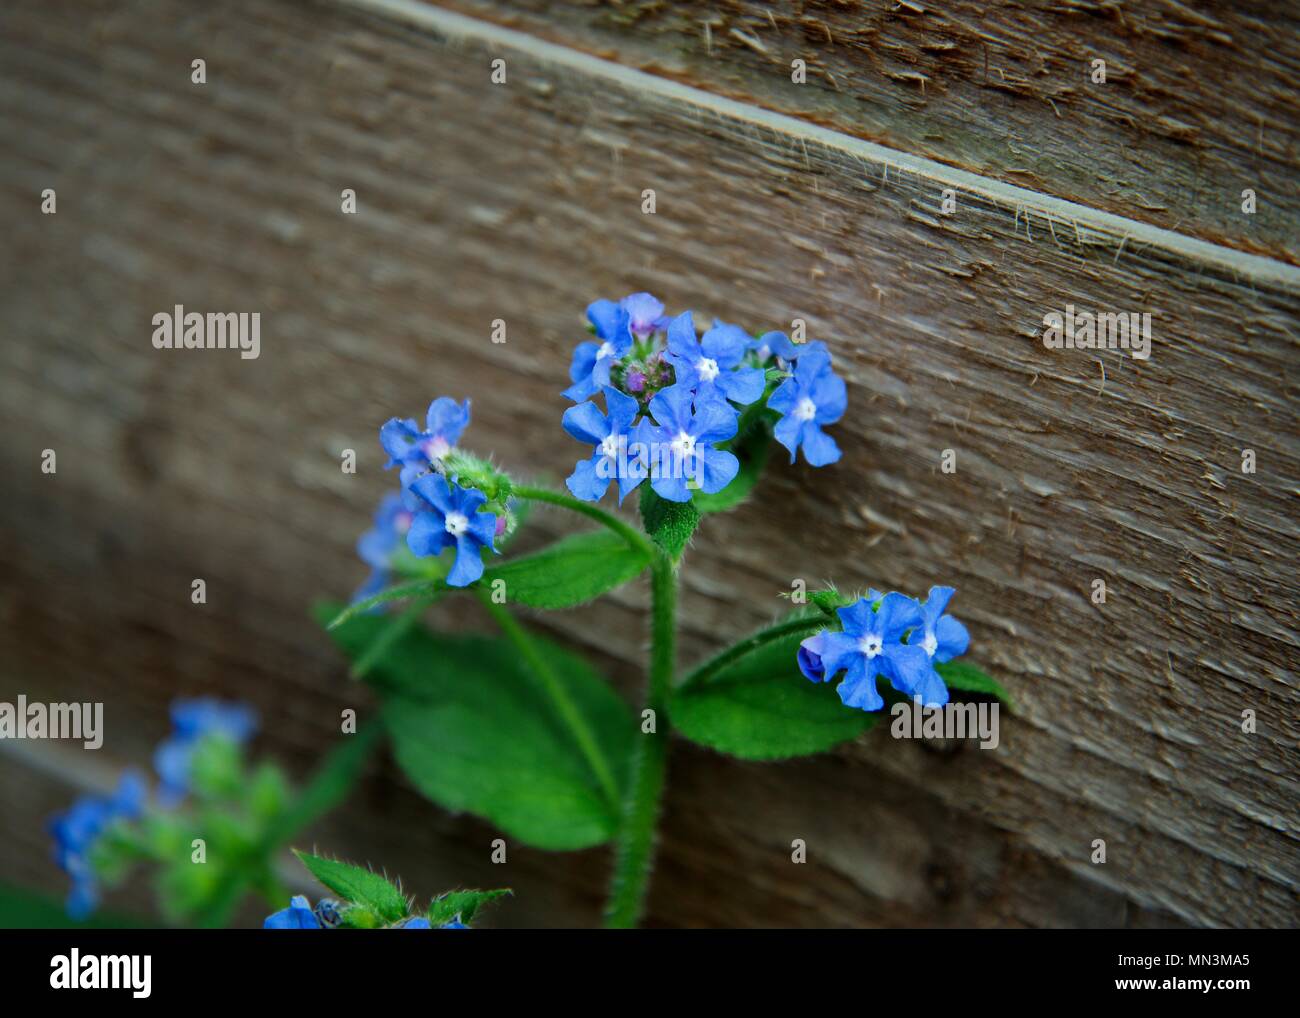 Blue Forget-Me-Not (Myosotis) growing by a wooden fence. Stock Photo